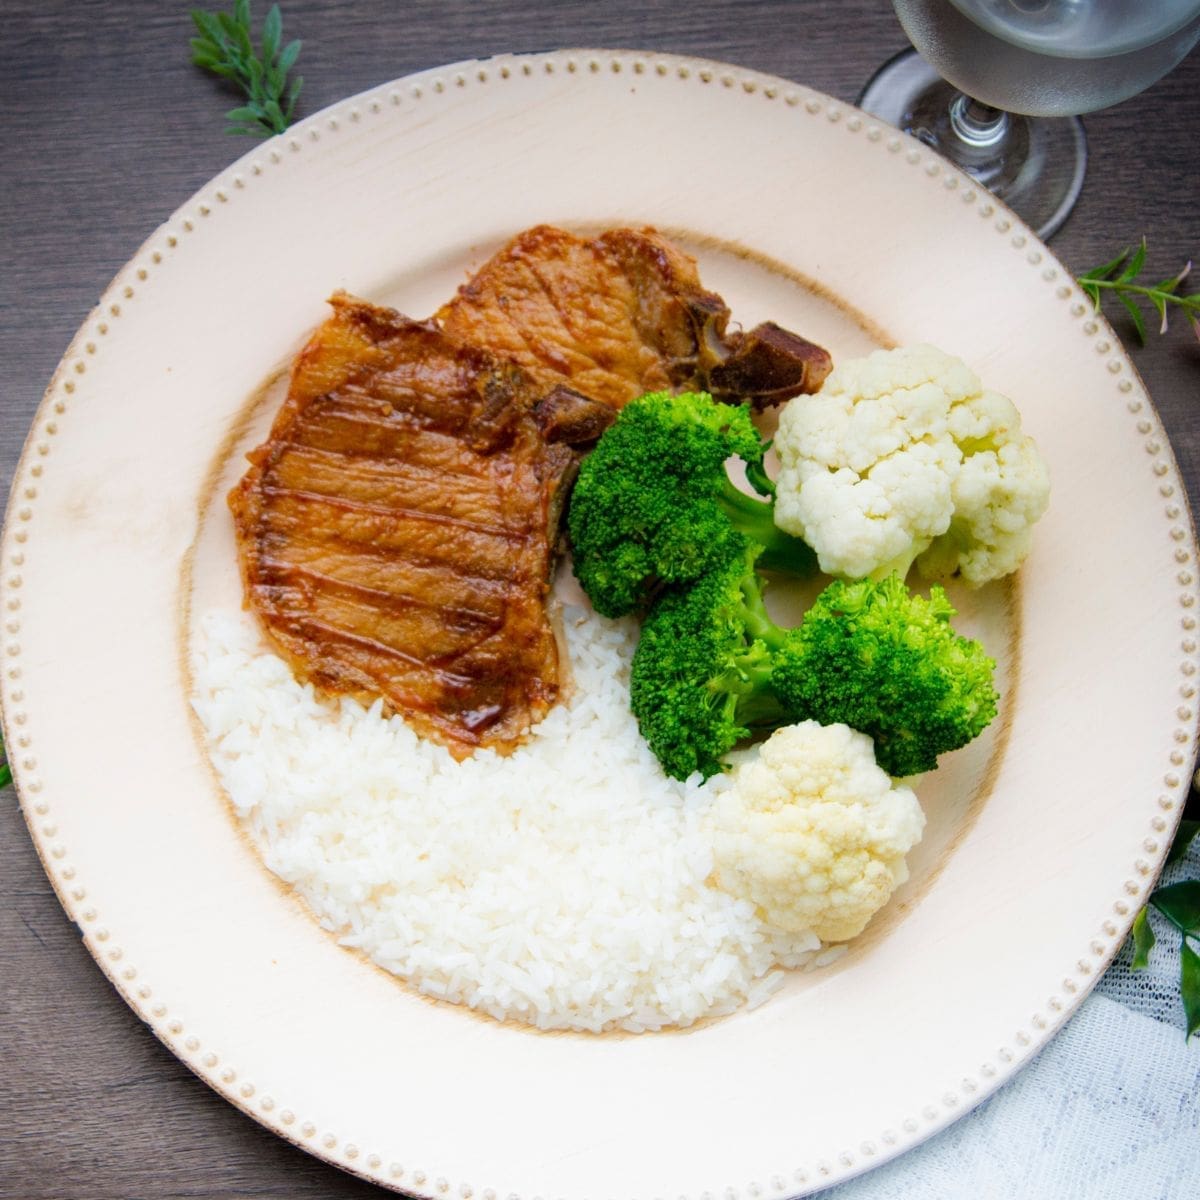 13 Pork Chop And Rice Recipes (Savory Family Meal Ideas)